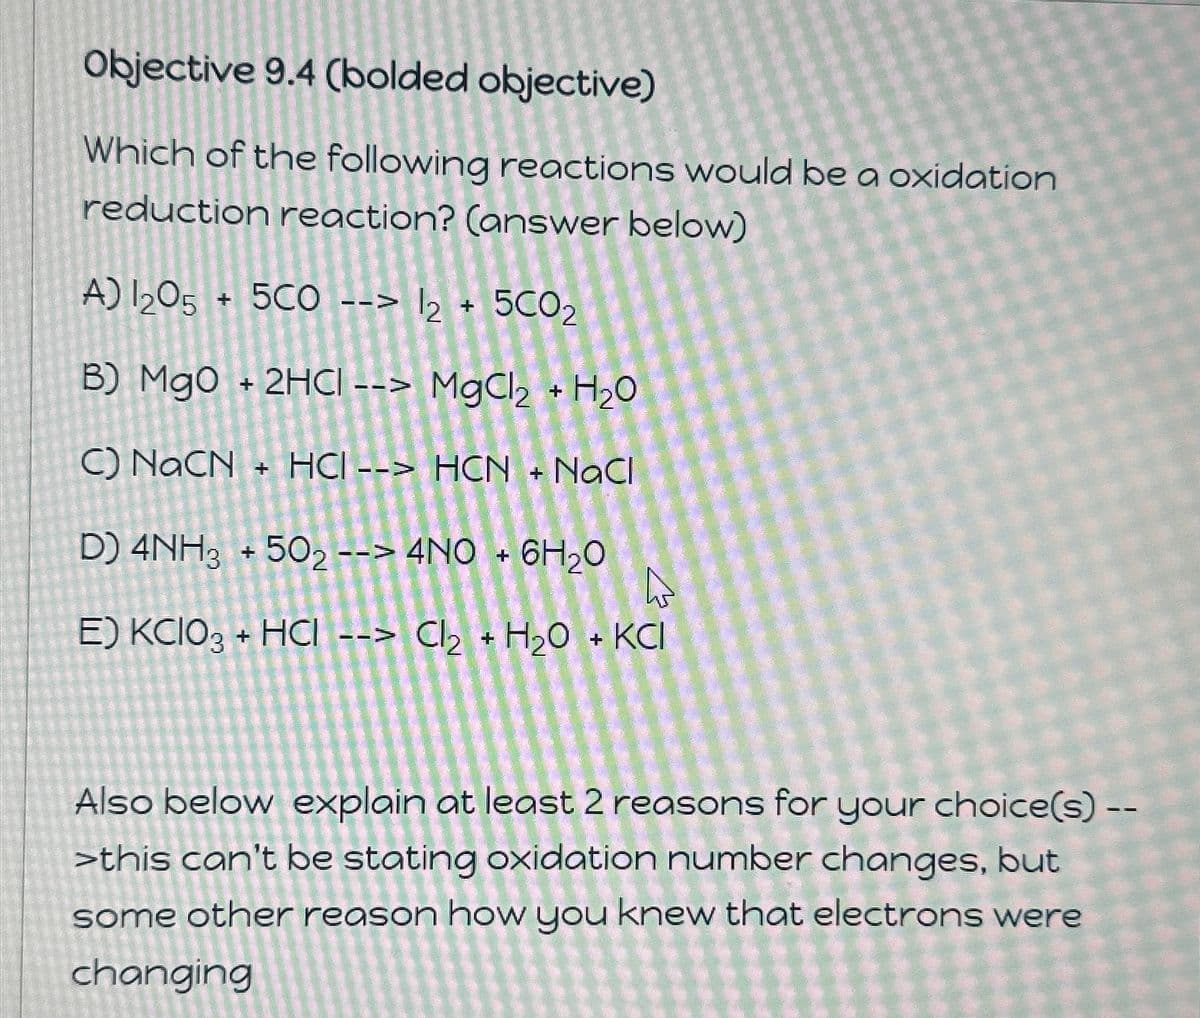 Objective 9.4 (bolded objective)
Which of the following reactions would be a oxidation
reduction reaction? (answer below)
A)2O5 + 5CO --> 2 + 5CO2
B) MgO + 2HCI --> MgCl2 + H2O
C) NaCN + HCI--> HCN + NaCl
D) 4NH3 + 502 --> 4NO + 6H₂O
E) KCIO3 + HCl --> Cl2 + H2O + KCI
Also below explain at least 2 reasons for your choice(s) --
>this can't be stating oxidation number changes, but
some other reason how you knew that electrons were
changing